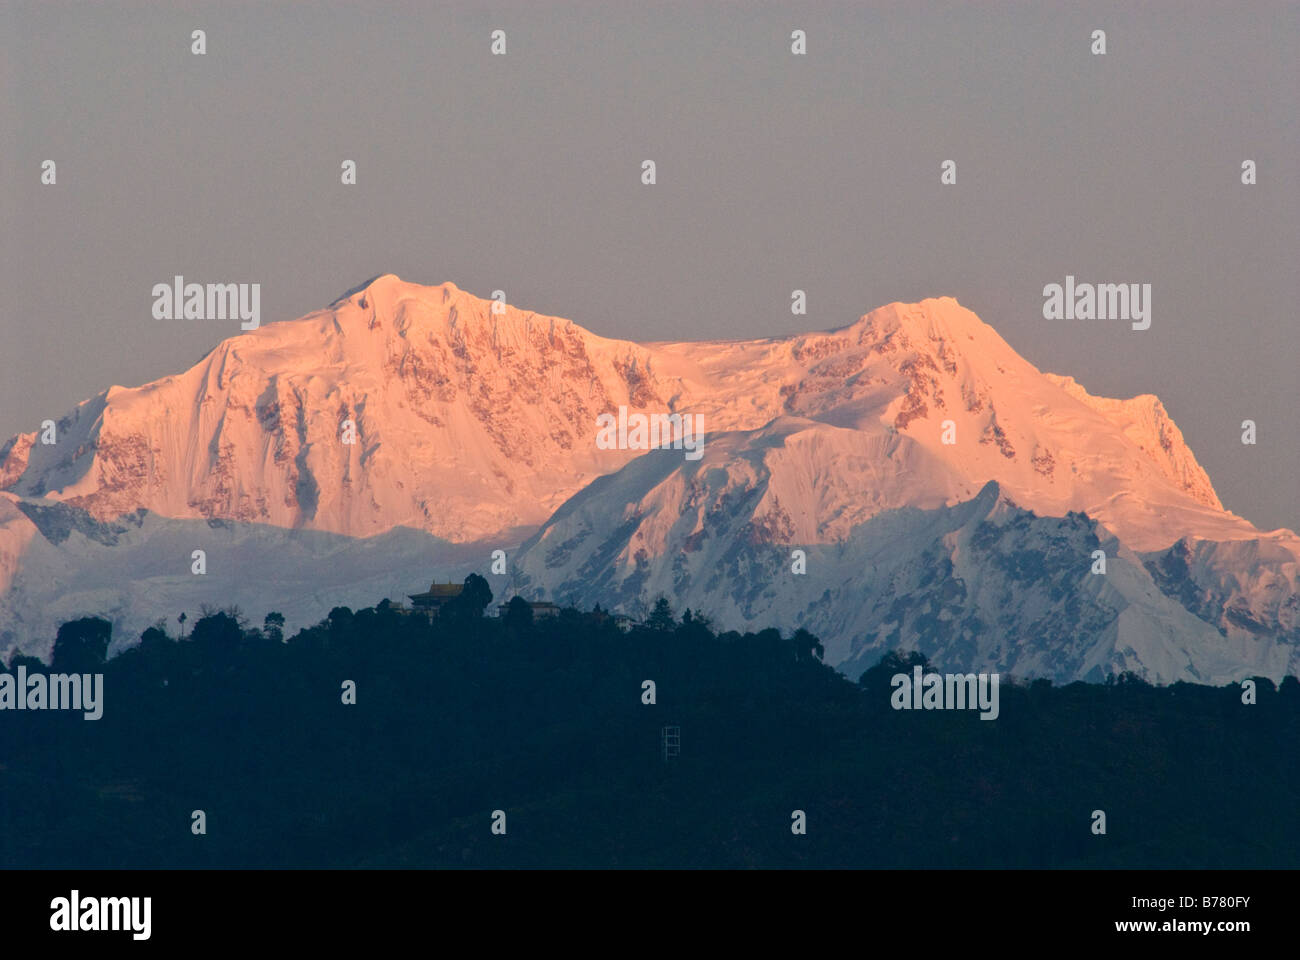 Peaks of the Kangchenjunga mountain range, Sikkim, at dawn. Pemayangtse monastery can be seen on the hilltop in the foreground. Stock Photo